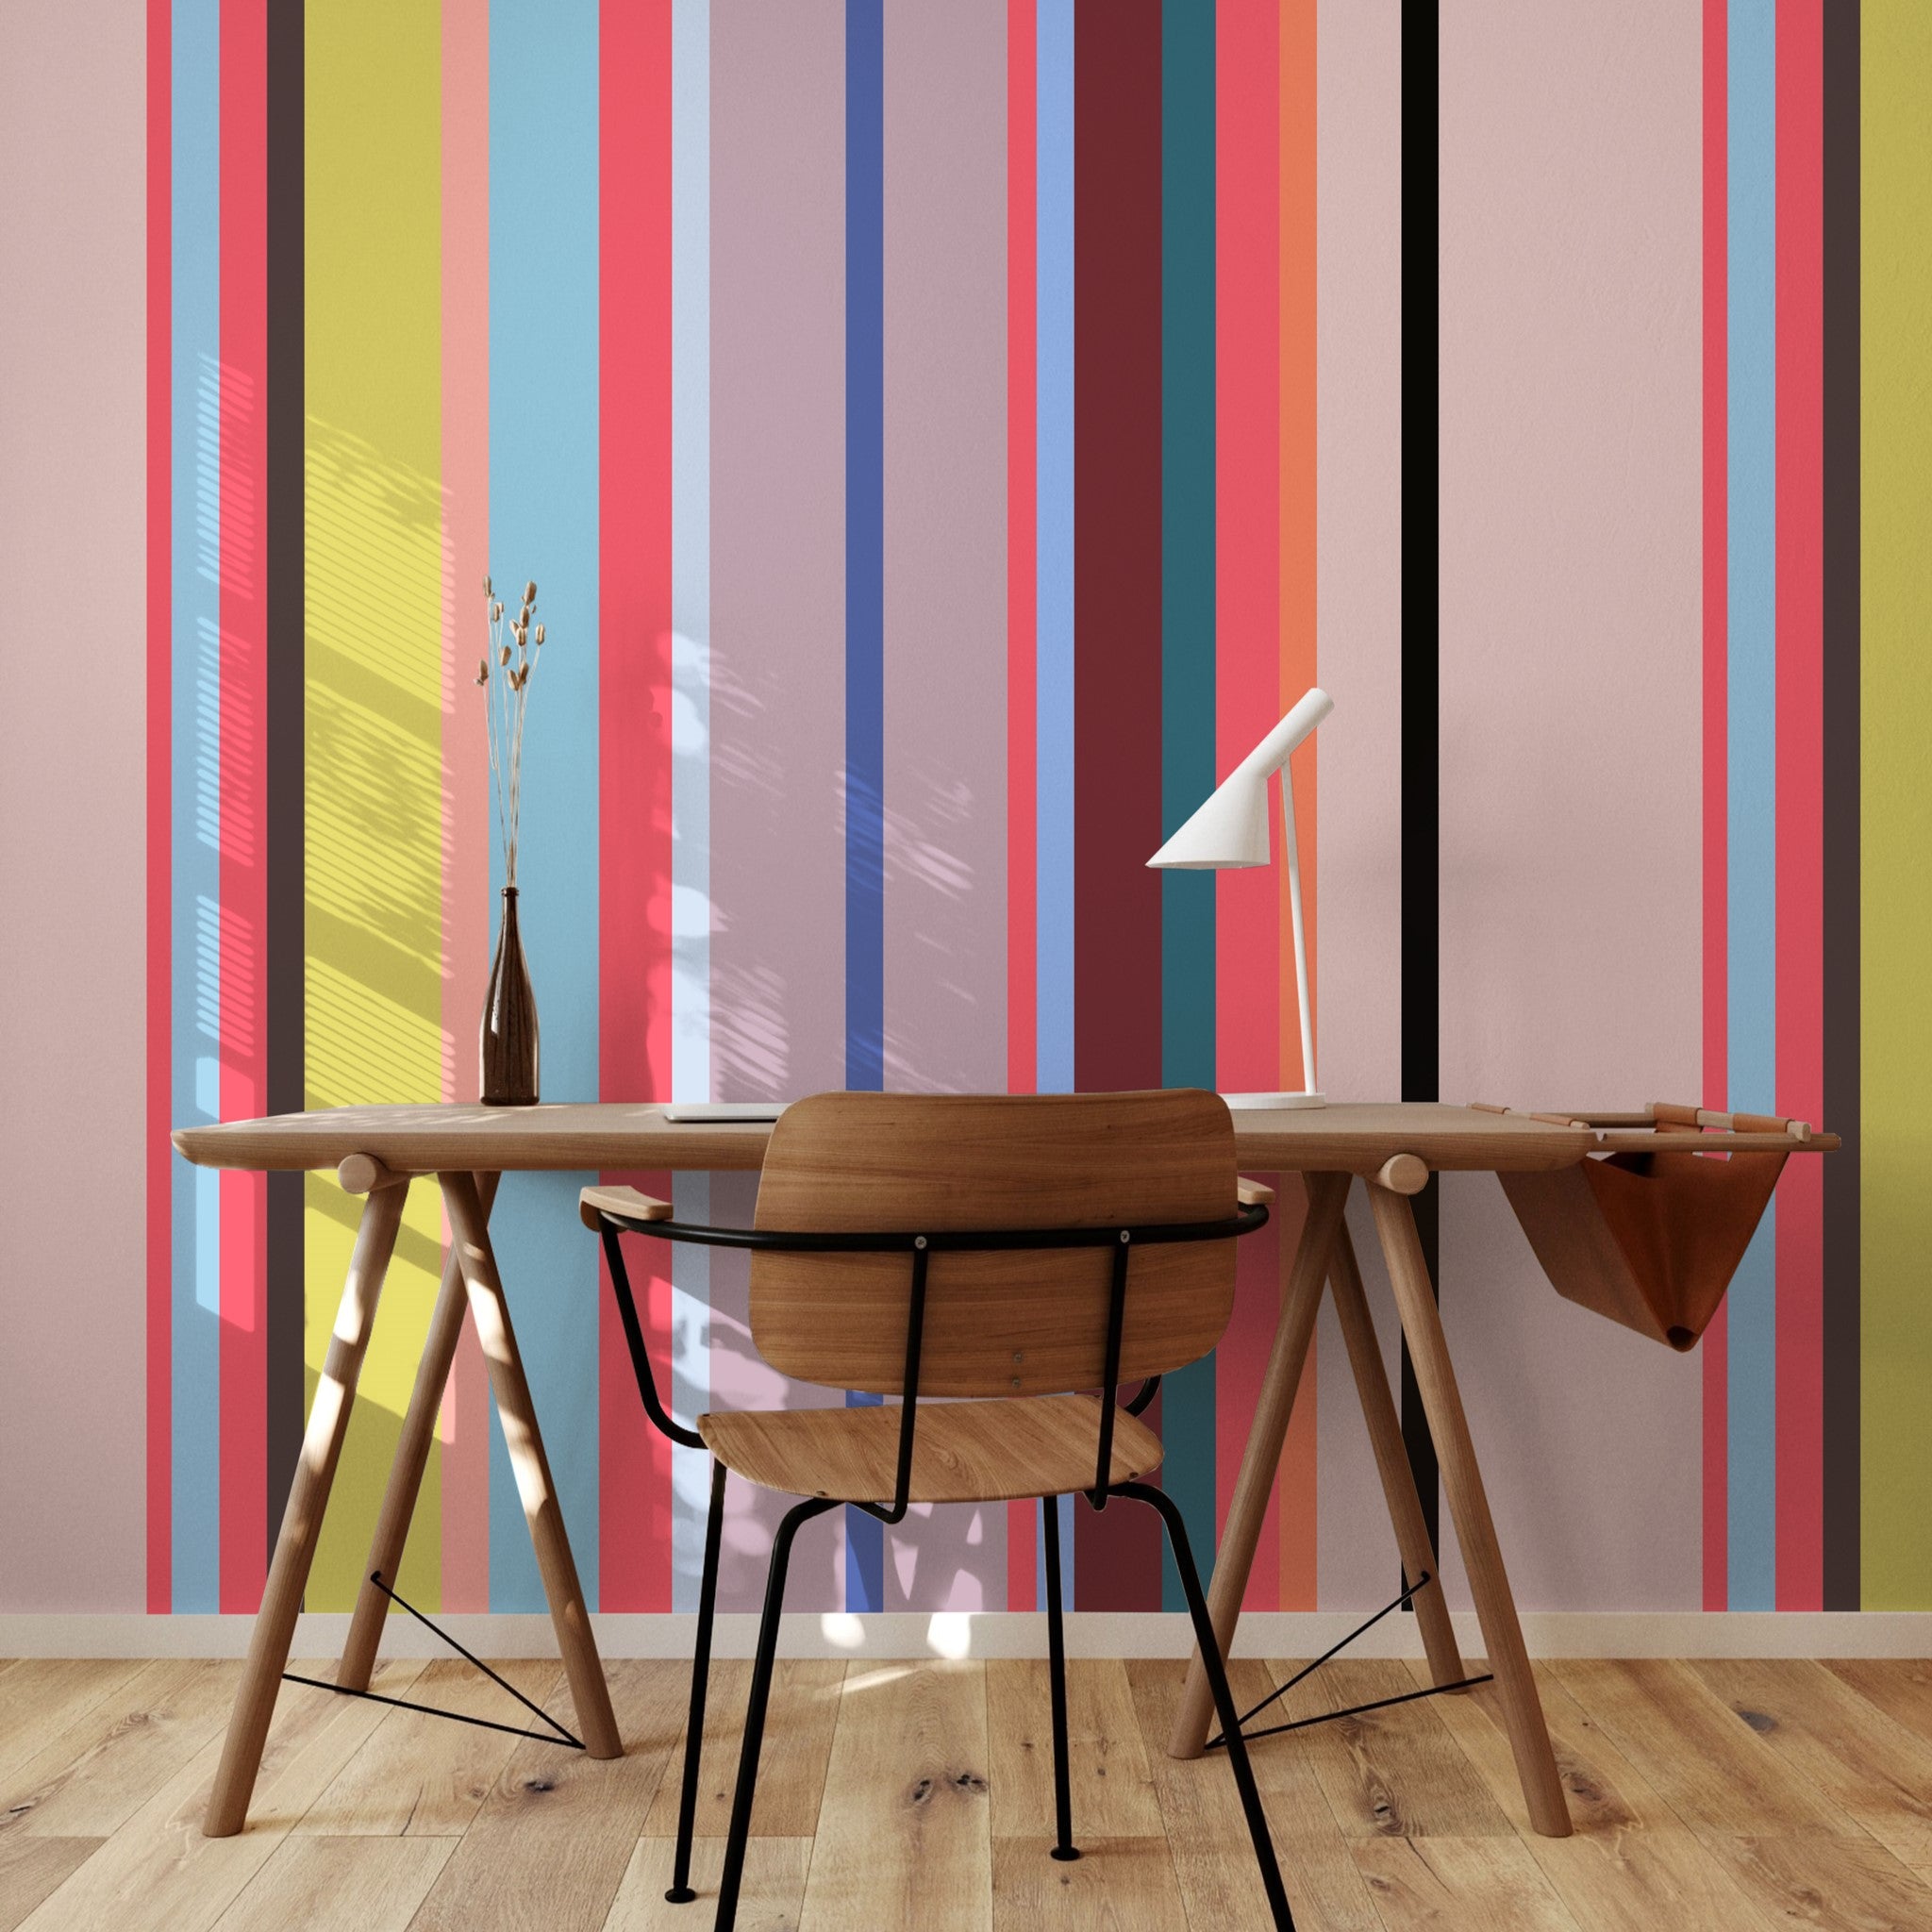 "Colorful So Fetch Wallpaper by Wall Blush in modern home office, accentuating vibrant, striped design focus."